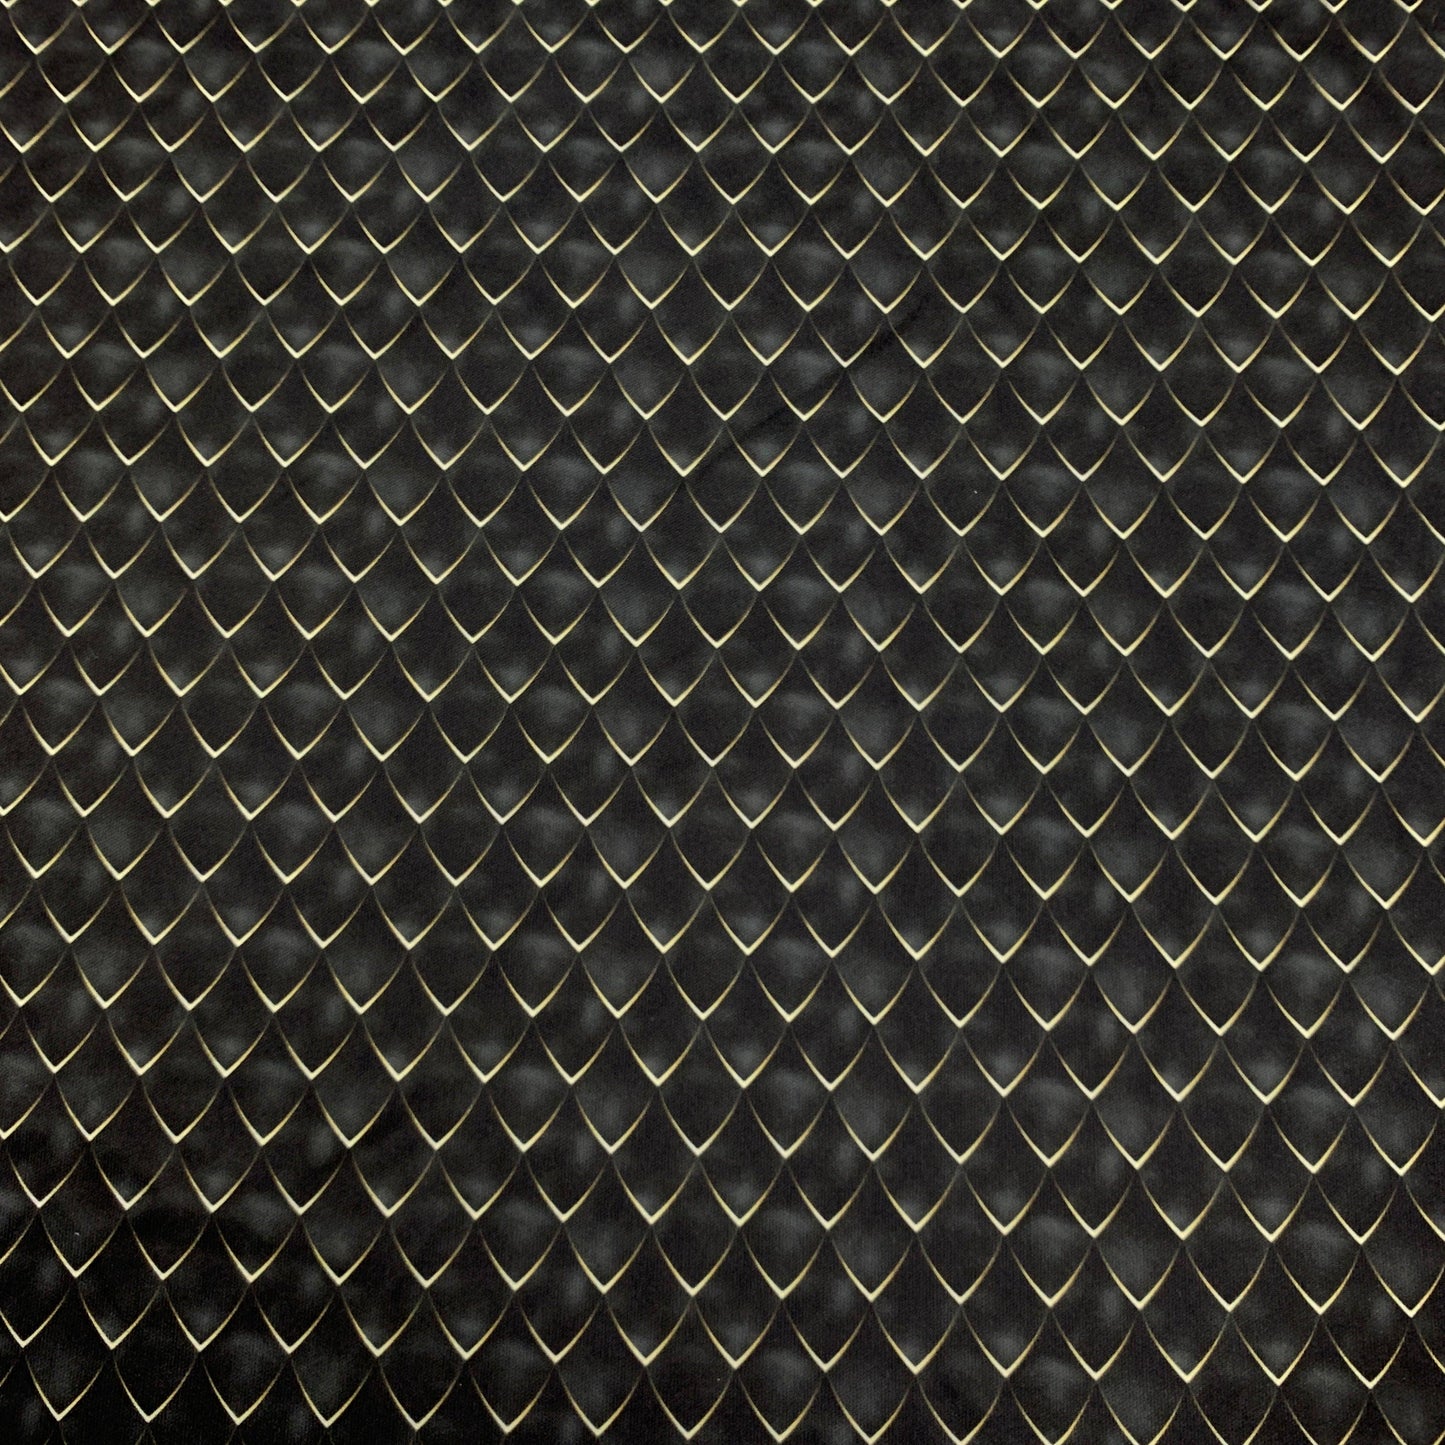 Black Dragon Scales 1 mil PUL Fabric - Made in the USA - Nature's Fabrics